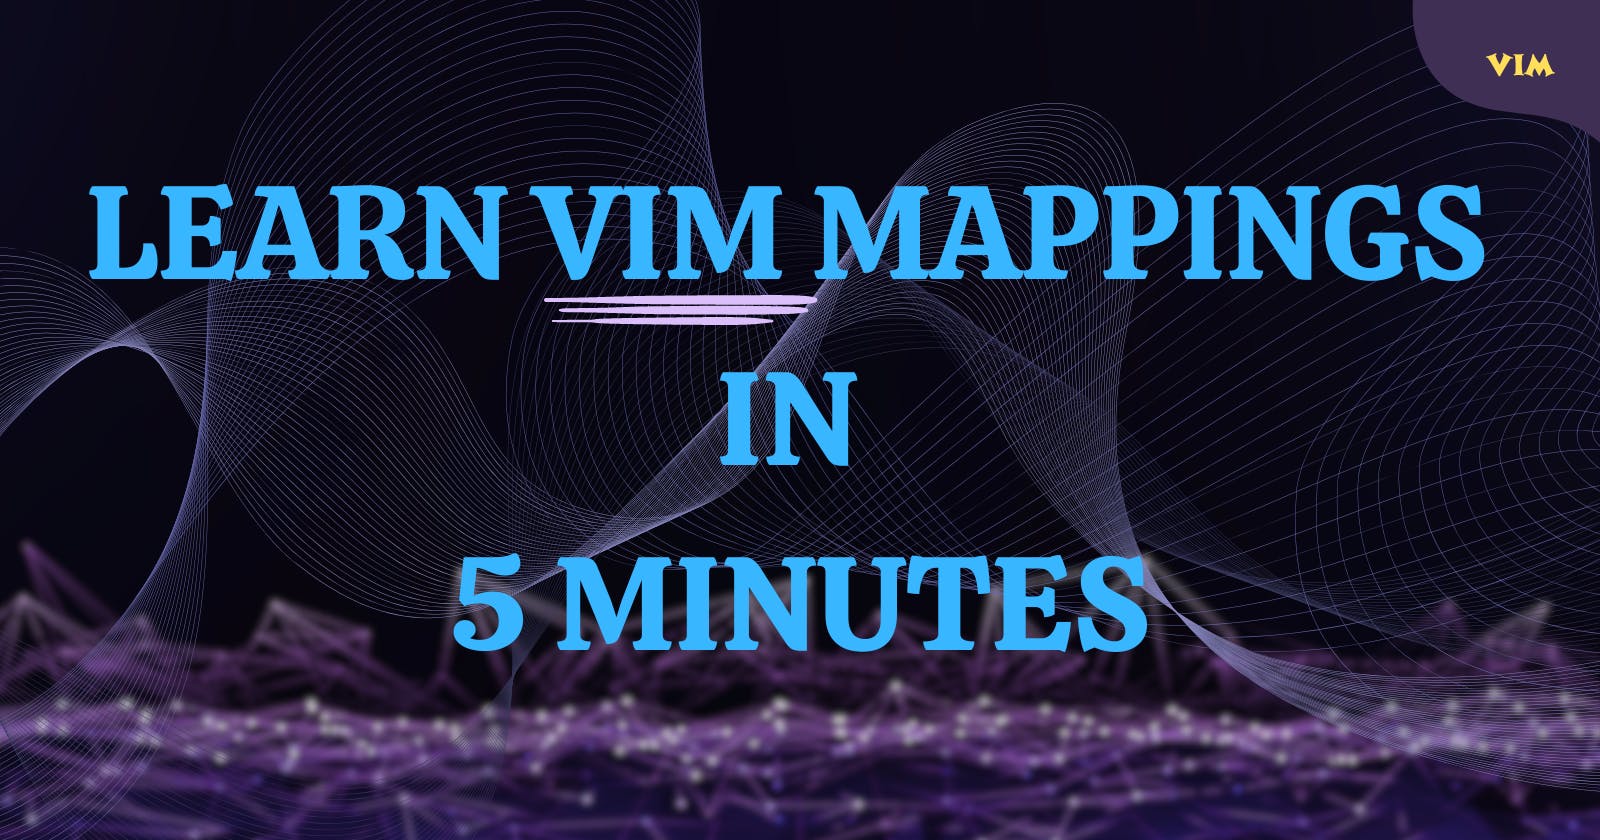 Learn Vim Mappings in 5 minutes